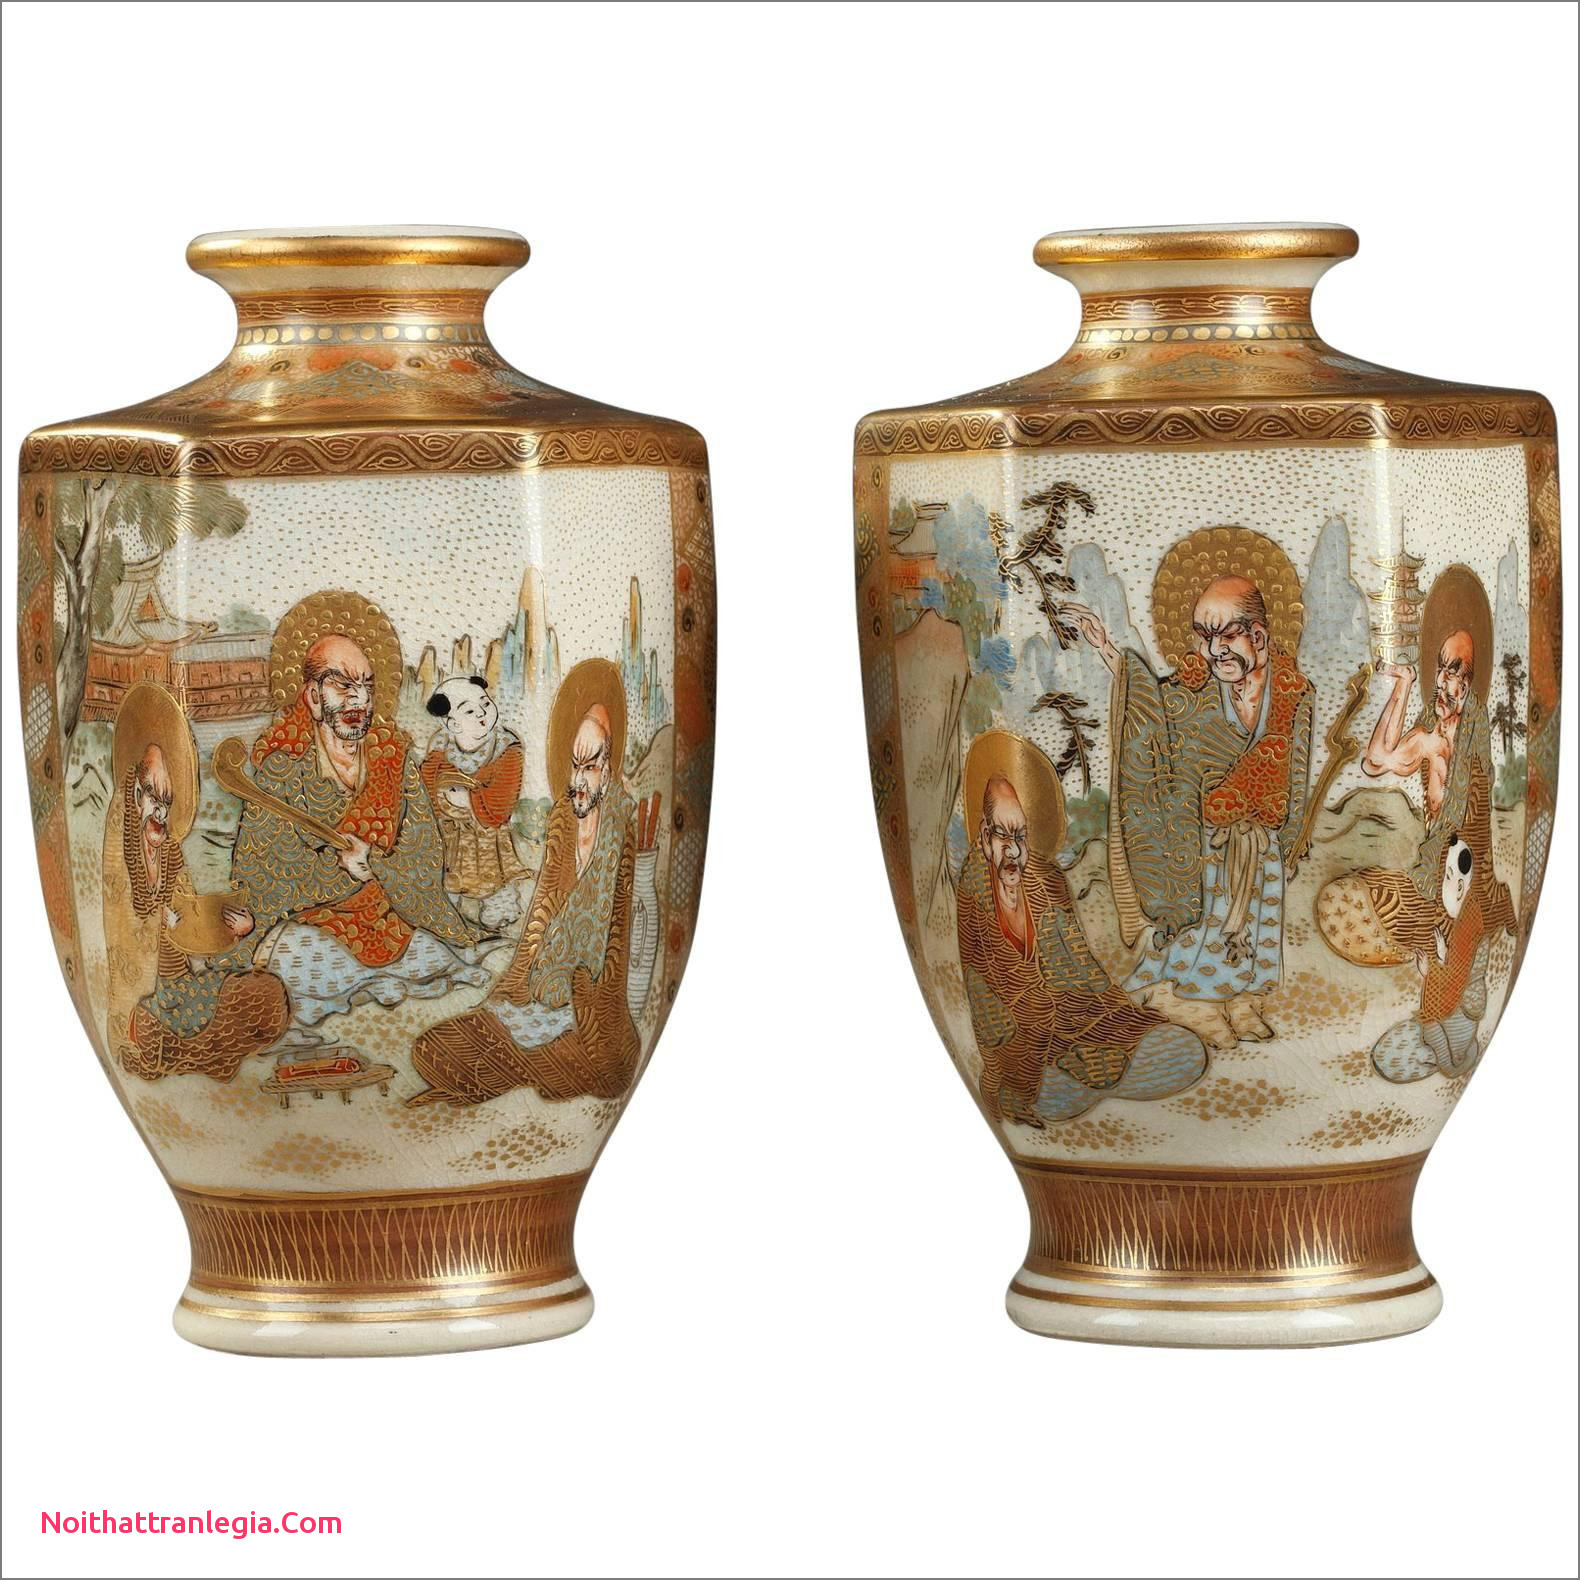 21 Awesome Waterford Blue Vase 2024 free download waterford blue vase of 20 chinese antique vase noithattranlegia vases design throughout chinese ginger jar table lamps elegant pair 20th century general porcelain trenton nj usa industrial 1